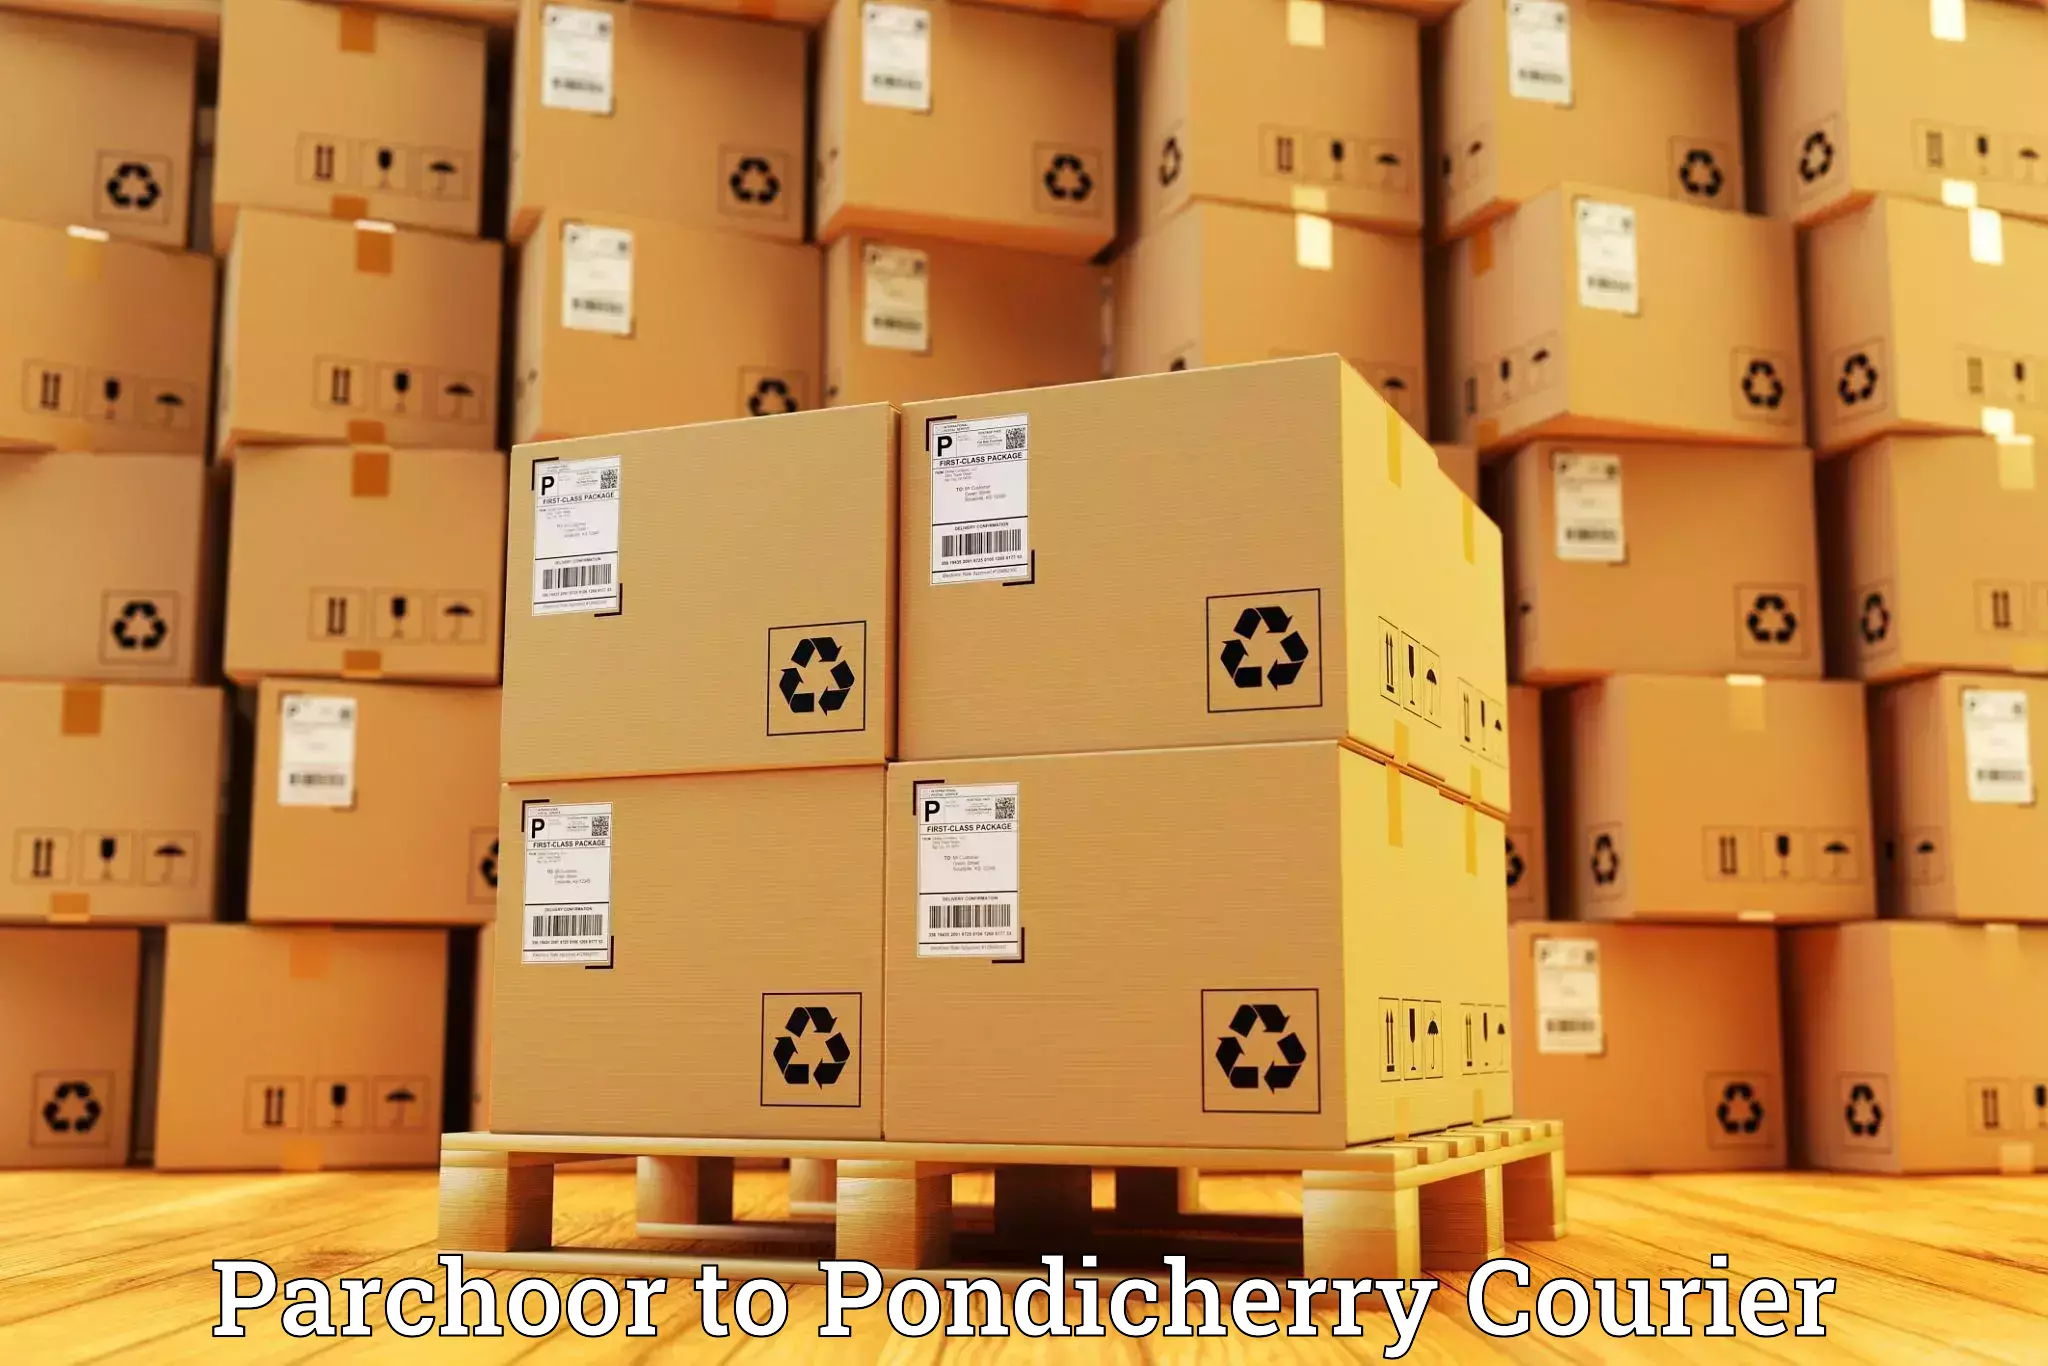 Express delivery network Parchoor to Pondicherry